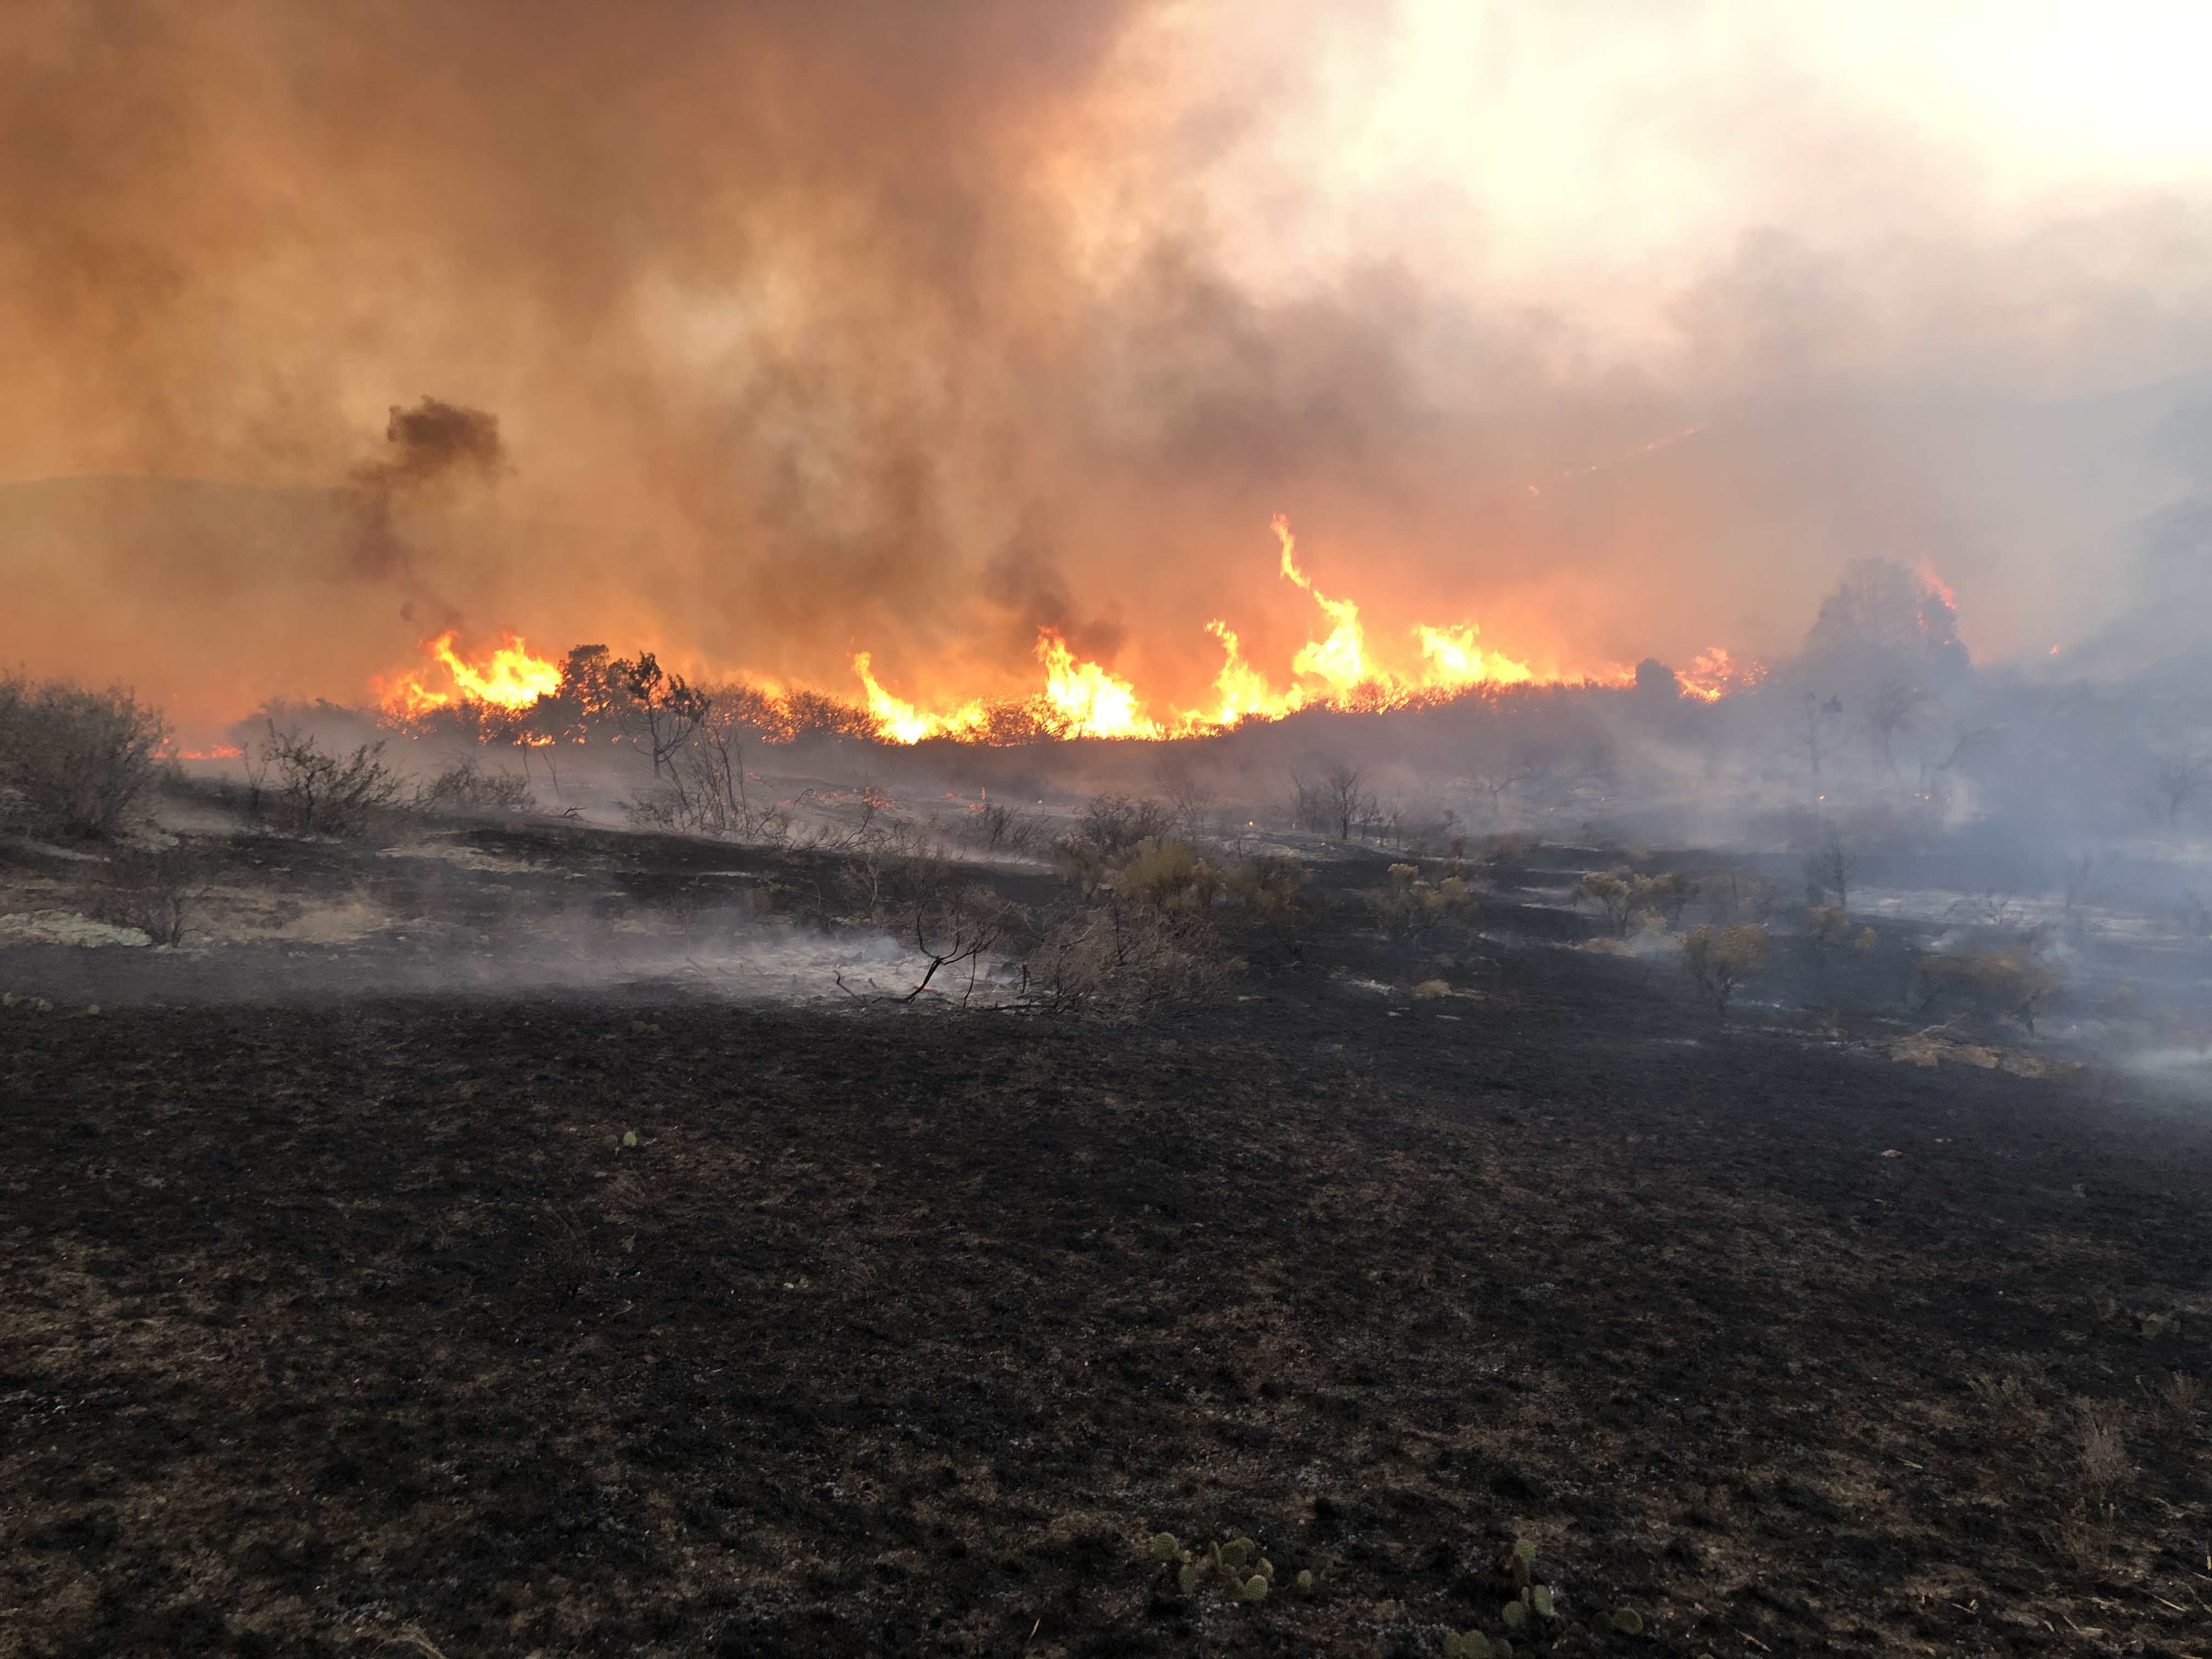 Photo of a wildfire burning across vegetation along the ground. Scorched earth is seen in the foreground, and angry yellow and orange flames reach up from the ground, creating clouds of black smoke which are rising into the sky.  Elsewhere in the air there is a thick gray blanket of smoke, and the scorched ground is smoking as well.